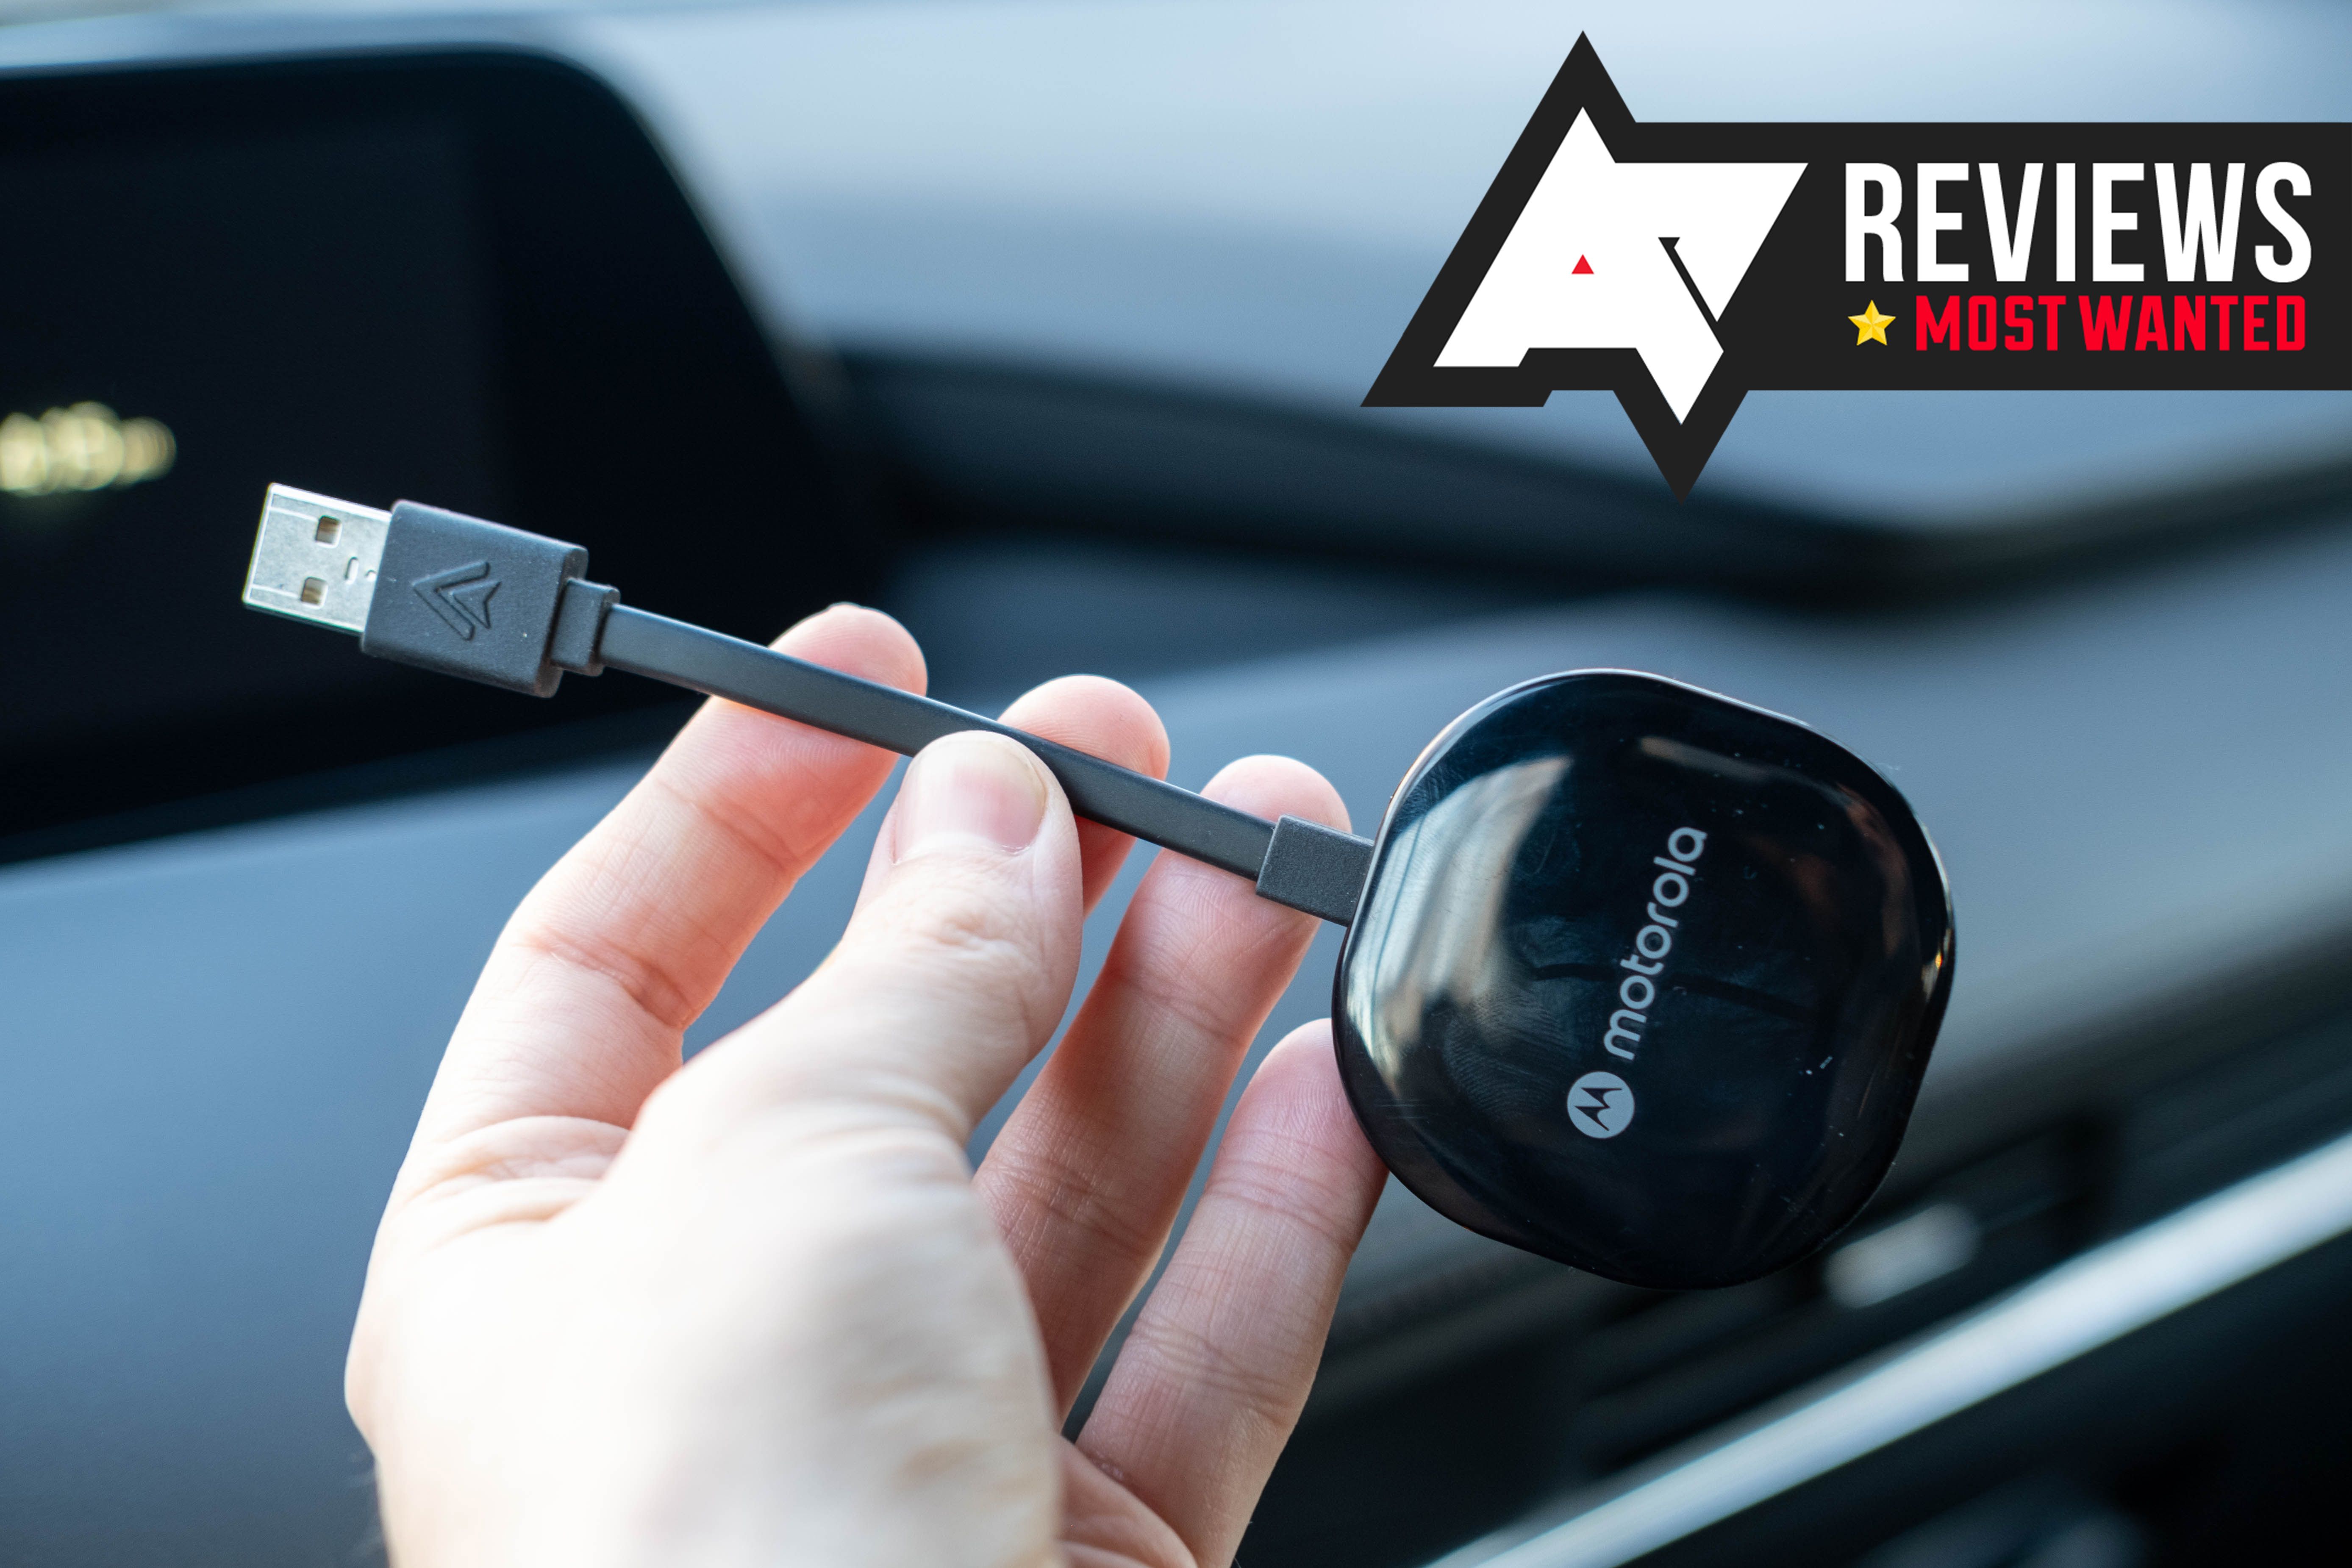 Motorola MA1 review: The best wireless Android Auto adapter